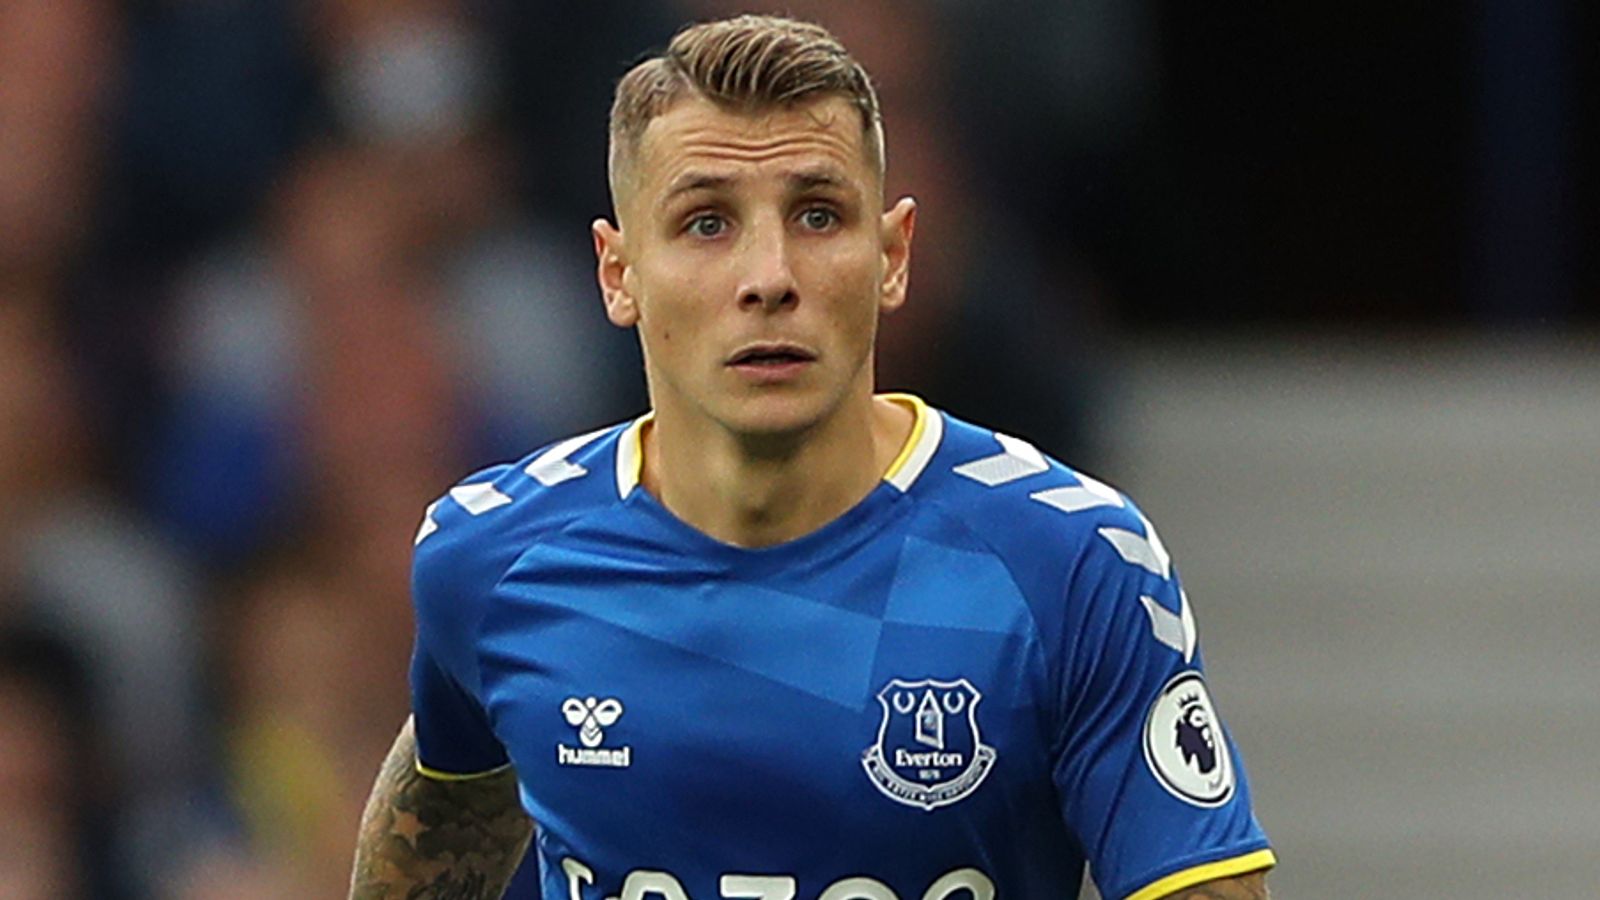 Aston Villa transfer news: Lucas Digne 'didn't expect to leave Everton this way' as he closes on £25m move